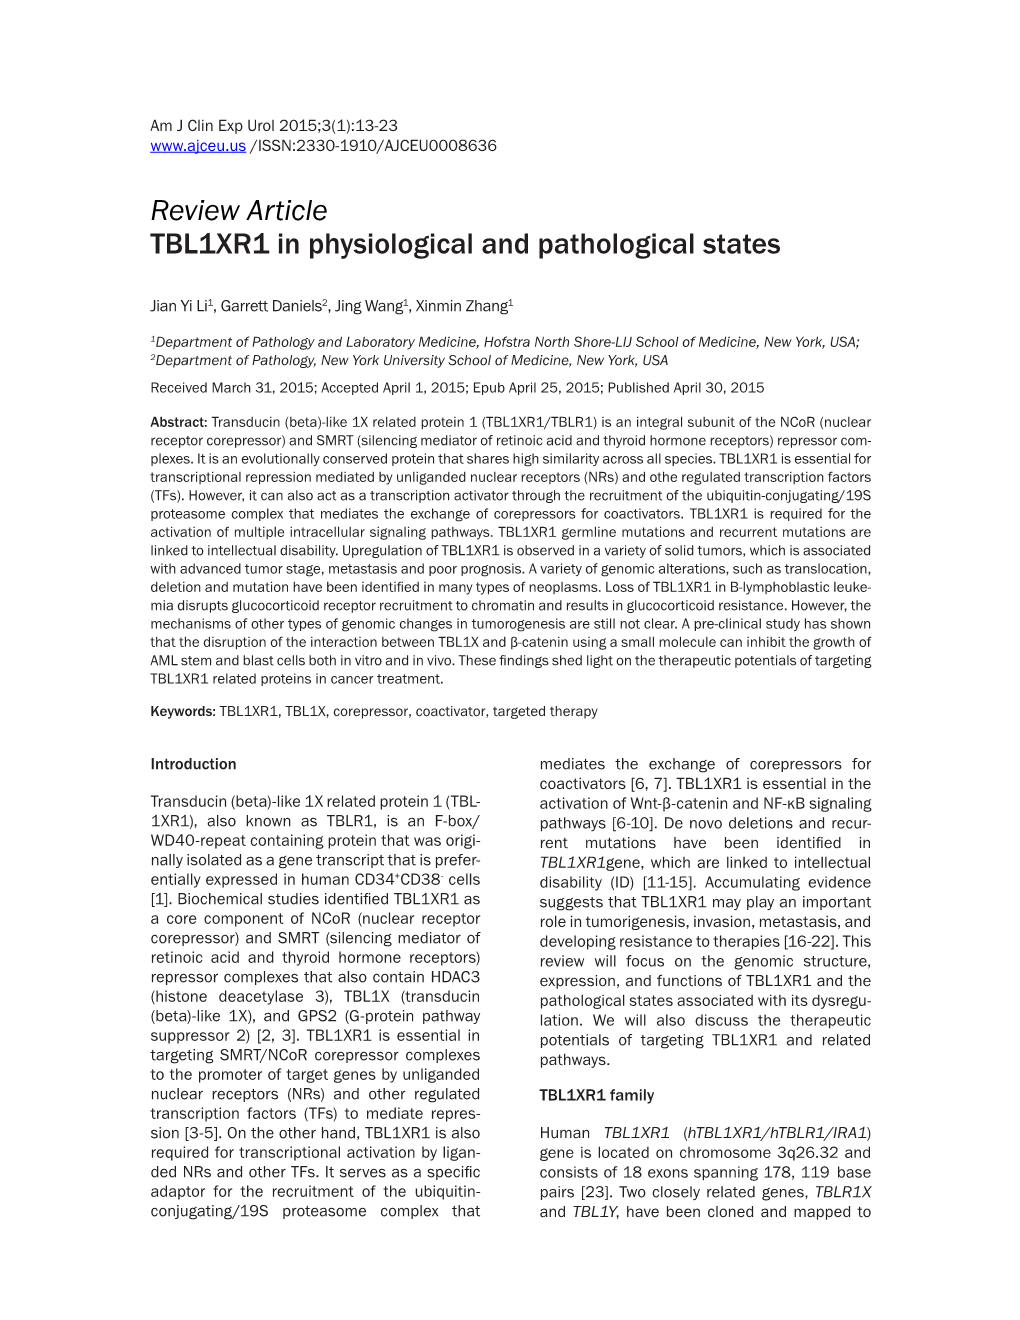 Review Article TBL1XR1 in Physiological and Pathological States